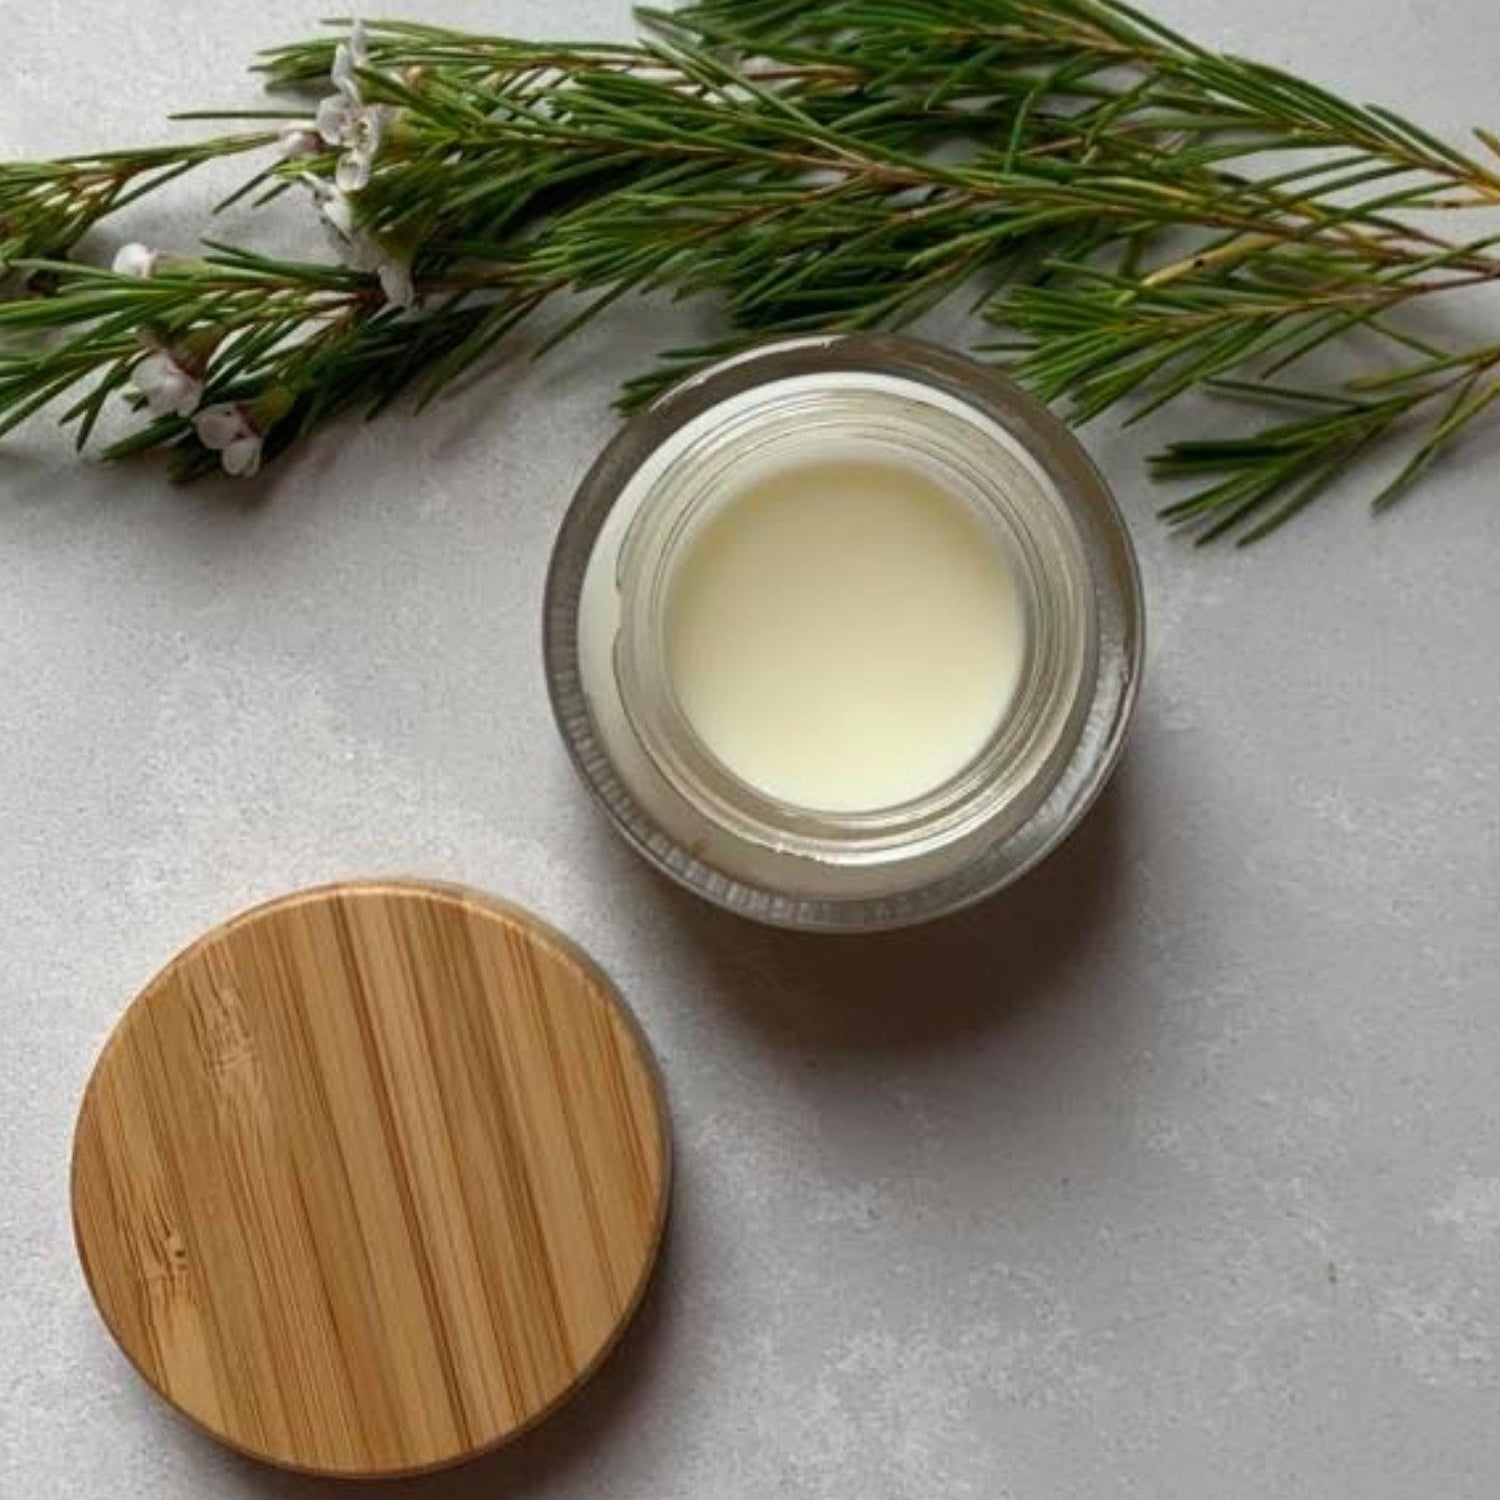 A bamboo and glass re-useable jar with lid off showing a natural cream essential oil multipurpose balm for adults, babies and children.